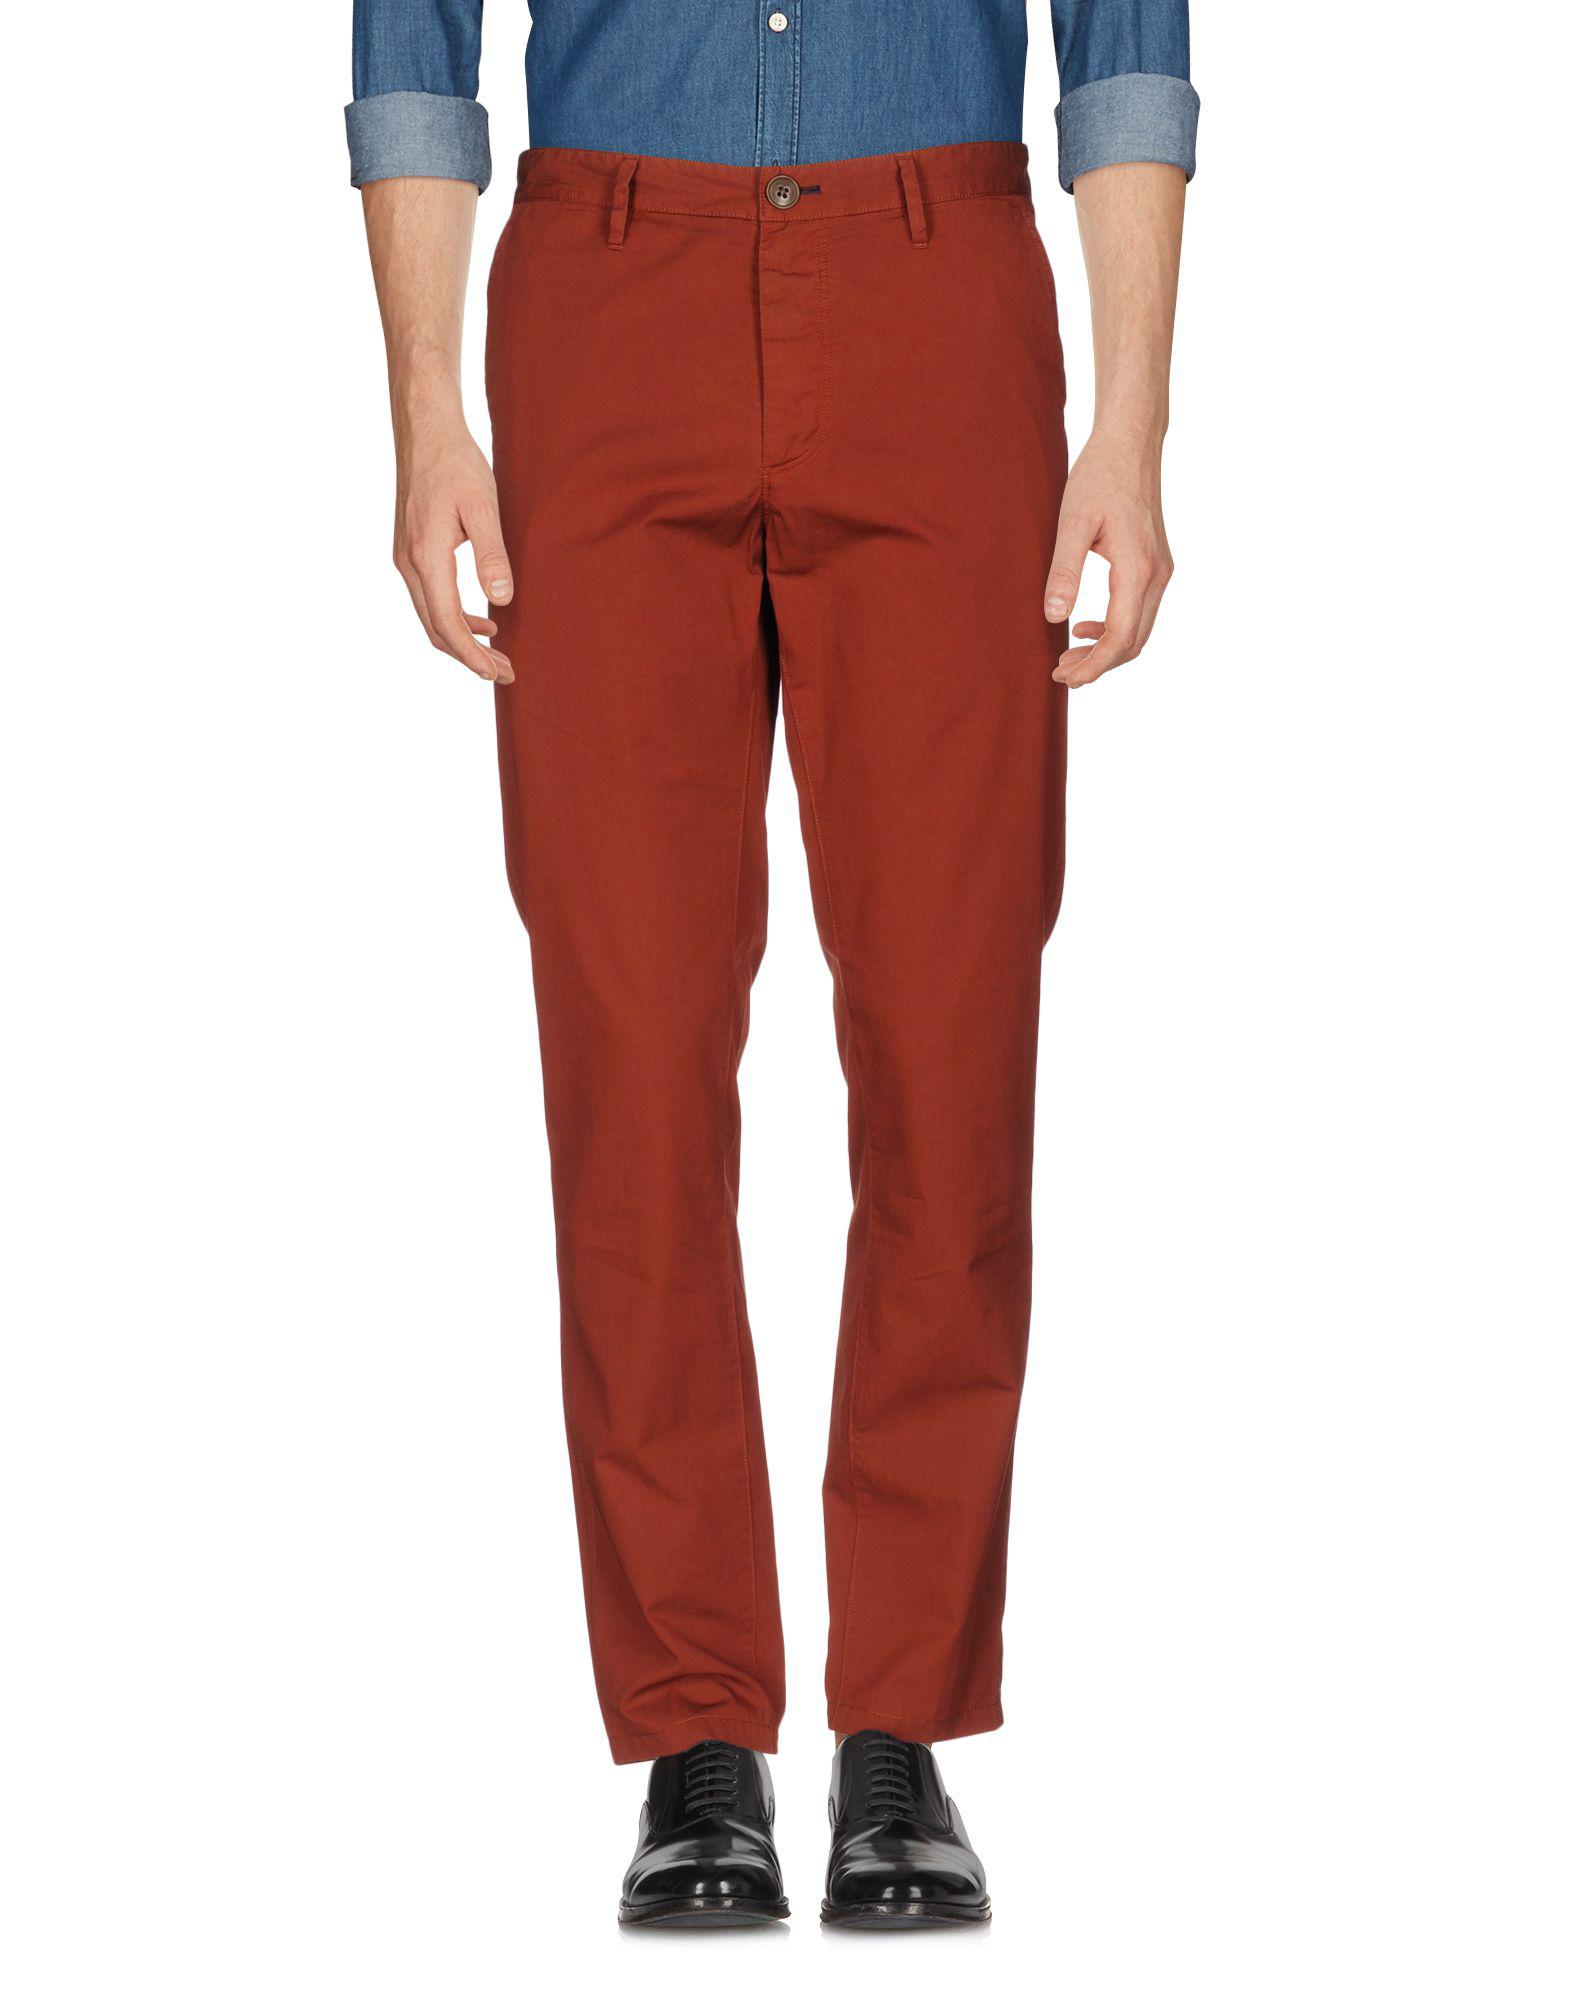 Paul Smith Cotton Casual Trouser in Rust (Red) for Men - Lyst